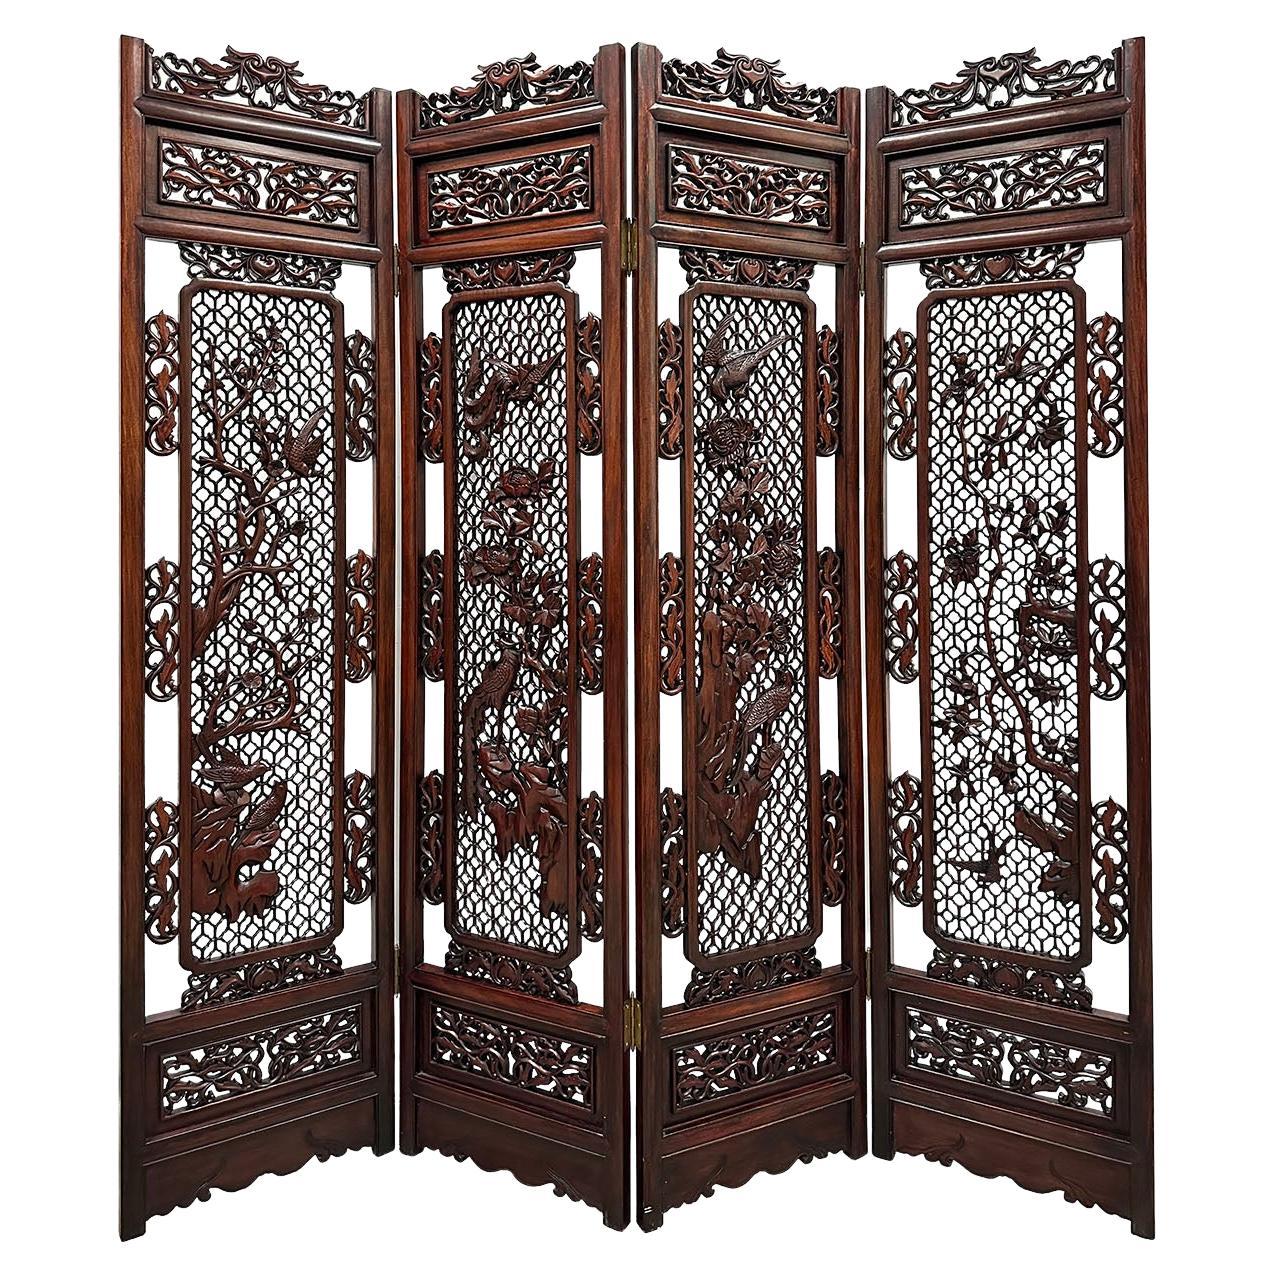 Mid-20th Century Chinese Rosewood Open Carved Screen/Room Divider